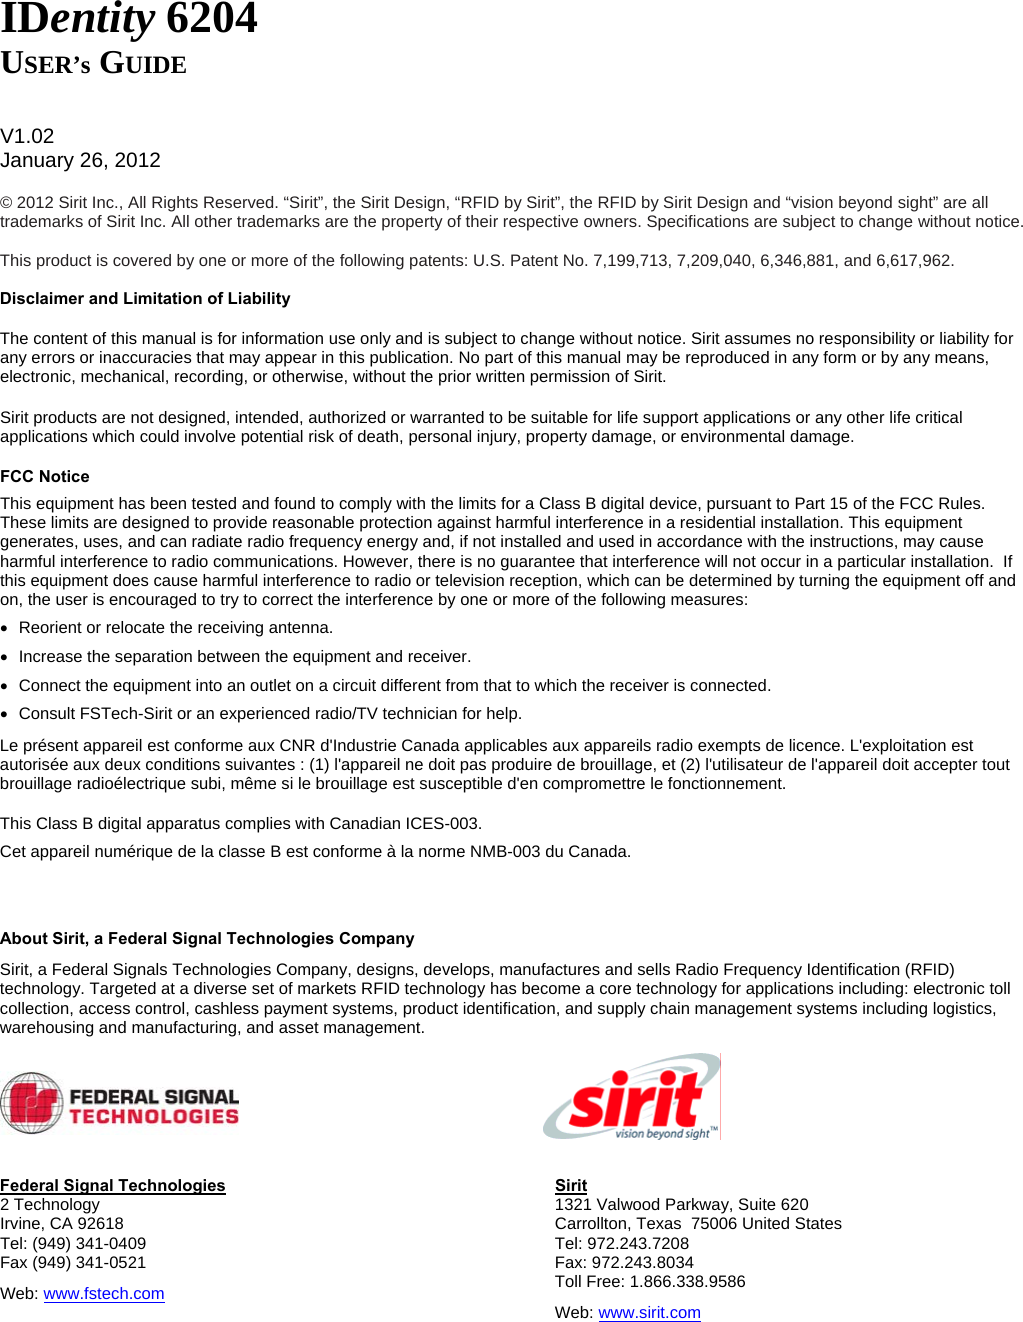   IDentity 6204 USER’s GUIDE   V1.02 January 26, 2012  © 2012 Sirit Inc., All Rights Reserved. “Sirit”, the Sirit Design, “RFID by Sirit”, the RFID by Sirit Design and “vision beyond sight” are all trademarks of Sirit Inc. All other trademarks are the property of their respective owners. Specifications are subject to change without notice.  This product is covered by one or more of the following patents: U.S. Patent No. 7,199,713, 7,209,040, 6,346,881, and 6,617,962.  Disclaimer and Limitation of Liability The content of this manual is for information use only and is subject to change without notice. Sirit assumes no responsibility or liability for any errors or inaccuracies that may appear in this publication. No part of this manual may be reproduced in any form or by any means, electronic, mechanical, recording, or otherwise, without the prior written permission of Sirit. Sirit products are not designed, intended, authorized or warranted to be suitable for life support applications or any other life critical applications which could involve potential risk of death, personal injury, property damage, or environmental damage. FCC Notice This equipment has been tested and found to comply with the limits for a Class B digital device, pursuant to Part 15 of the FCC Rules. These limits are designed to provide reasonable protection against harmful interference in a residential installation. This equipment generates, uses, and can radiate radio frequency energy and, if not installed and used in accordance with the instructions, may cause harmful interference to radio communications. However, there is no guarantee that interference will not occur in a particular installation.  If this equipment does cause harmful interference to radio or television reception, which can be determined by turning the equipment off and on, the user is encouraged to try to correct the interference by one or more of the following measures: •  Reorient or relocate the receiving antenna. •  Increase the separation between the equipment and receiver. •  Connect the equipment into an outlet on a circuit different from that to which the receiver is connected. •  Consult FSTech-Sirit or an experienced radio/TV technician for help. Le présent appareil est conforme aux CNR d&apos;Industrie Canada applicables aux appareils radio exempts de licence. L&apos;exploitation est autorisée aux deux conditions suivantes : (1) l&apos;appareil ne doit pas produire de brouillage, et (2) l&apos;utilisateur de l&apos;appareil doit accepter tout brouillage radioélectrique subi, même si le brouillage est susceptible d&apos;en compromettre le fonctionnement. This Class B digital apparatus complies with Canadian ICES-003.  Cet appareil numérique de la classe B est conforme à la norme NMB-003 du Canada.   About Sirit, a Federal Signal Technologies Company Sirit, a Federal Signals Technologies Company, designs, develops, manufactures and sells Radio Frequency Identification (RFID) technology. Targeted at a diverse set of markets RFID technology has become a core technology for applications including: electronic toll collection, access control, cashless payment systems, product identification, and supply chain management systems including logistics, warehousing and manufacturing, and asset management.     Federal Signal Technologies 2 Technology Irvine, CA 92618 Tel: (949) 341-0409 Fax (949) 341-0521 Web: www.fstech.com Sirit 1321 Valwood Parkway, Suite 620  Carrollton, Texas  75006 United States Tel: 972.243.7208 Fax: 972.243.8034 Toll Free: 1.866.338.9586 Web: www.sirit.com   